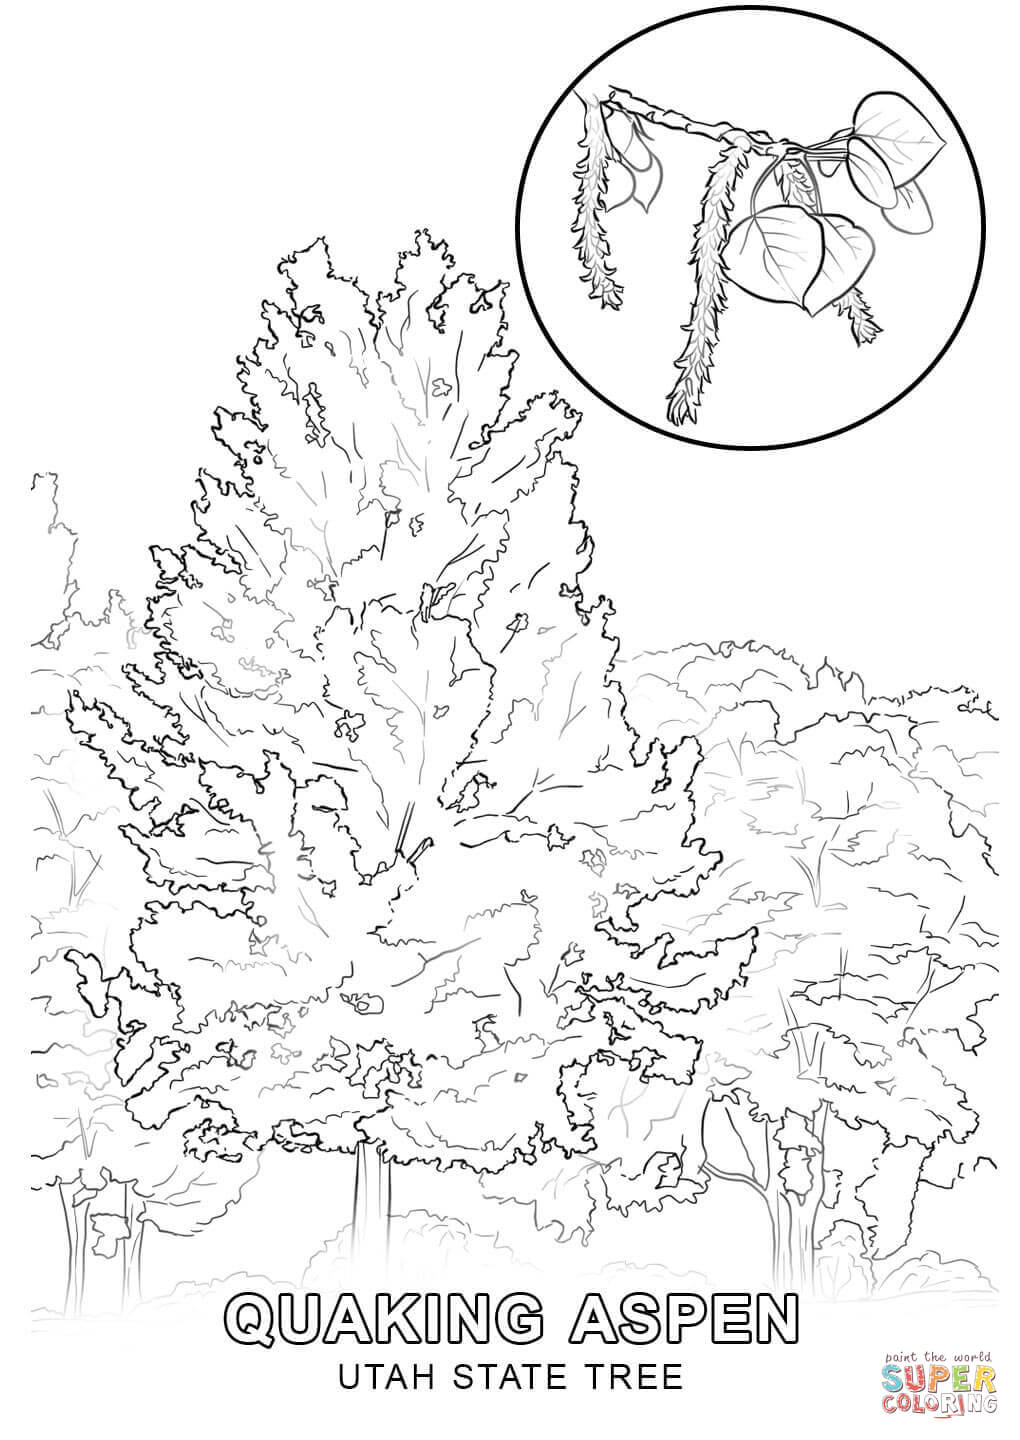 Utah State Tree coloring page | Free Printable Coloring Pages